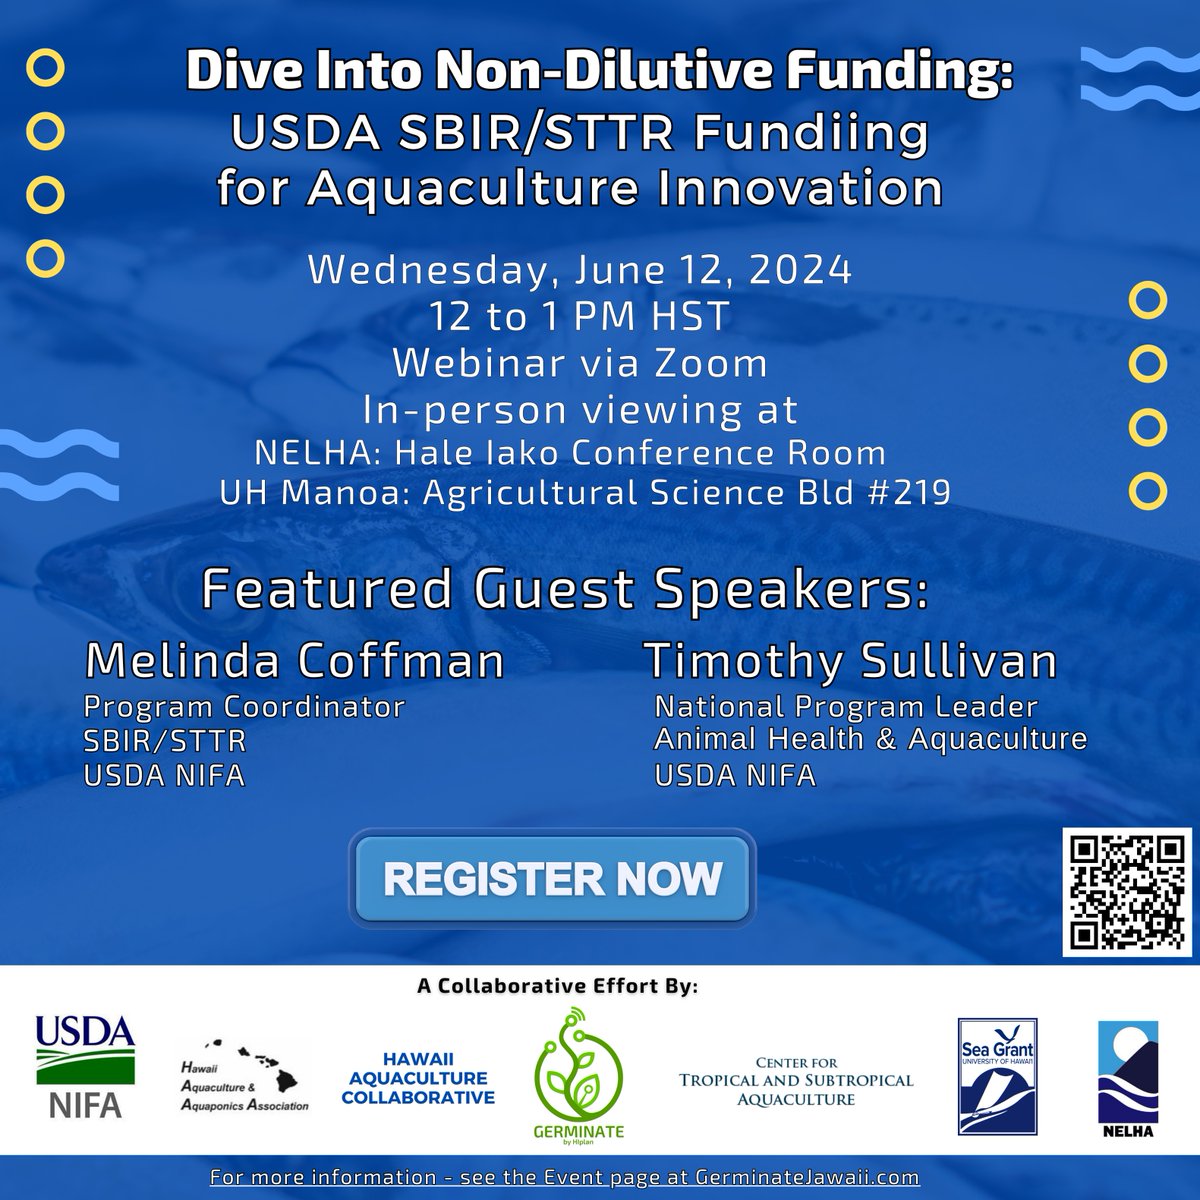 🌊 Dive into aquaculture innovation with the USDA Aquaculture SBIR/STTR Webinar on June 12th, 12 - 1 pm HST! Learn about funding opportunities and insights from industry experts. Free registration: bit.ly/3WQVeZL

#FTZ #GerminateHI #AquacultureInnovation #SBIR #STTR